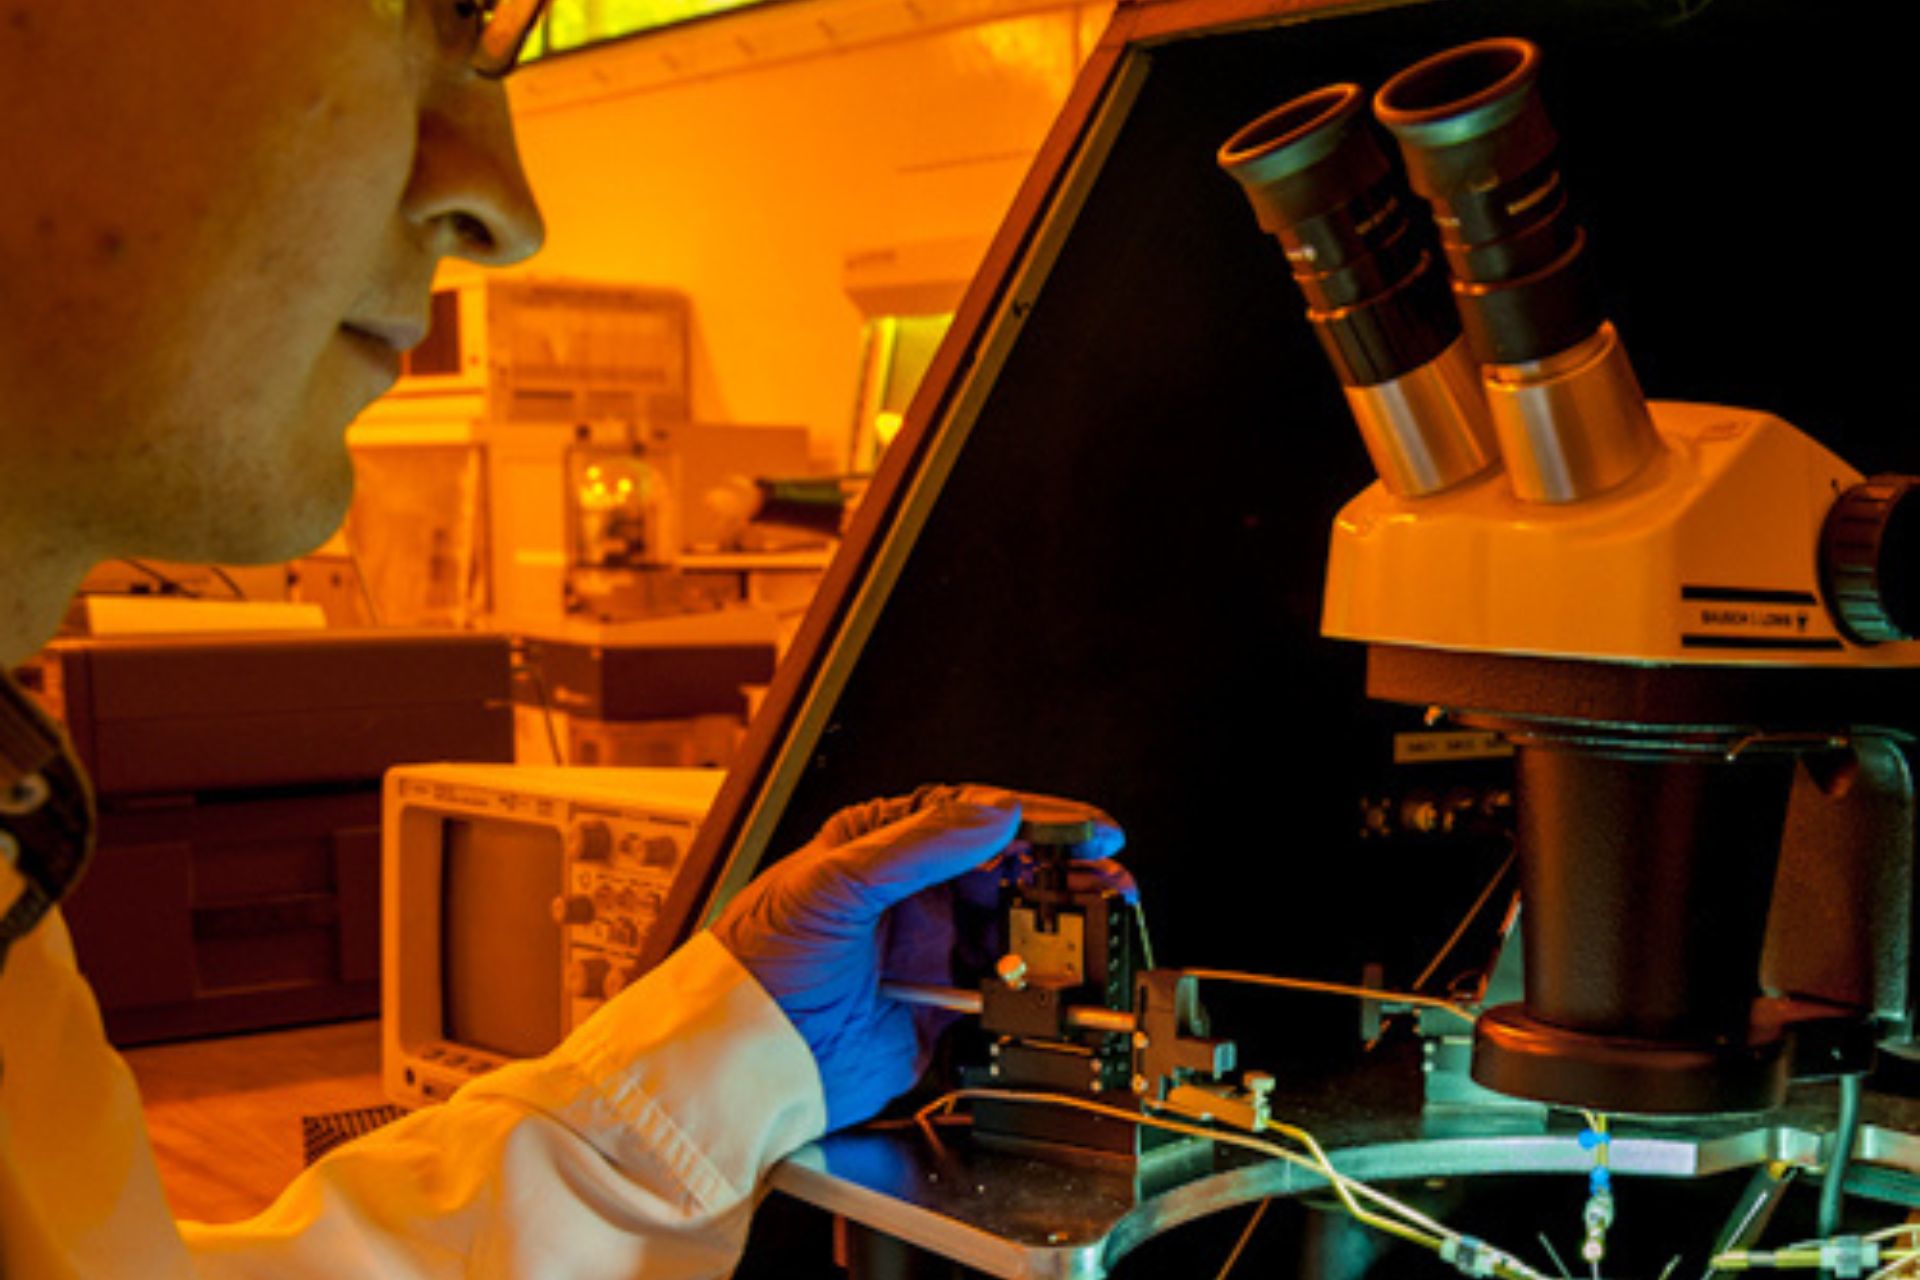 A researcher working with small electronics while looking through a microscope